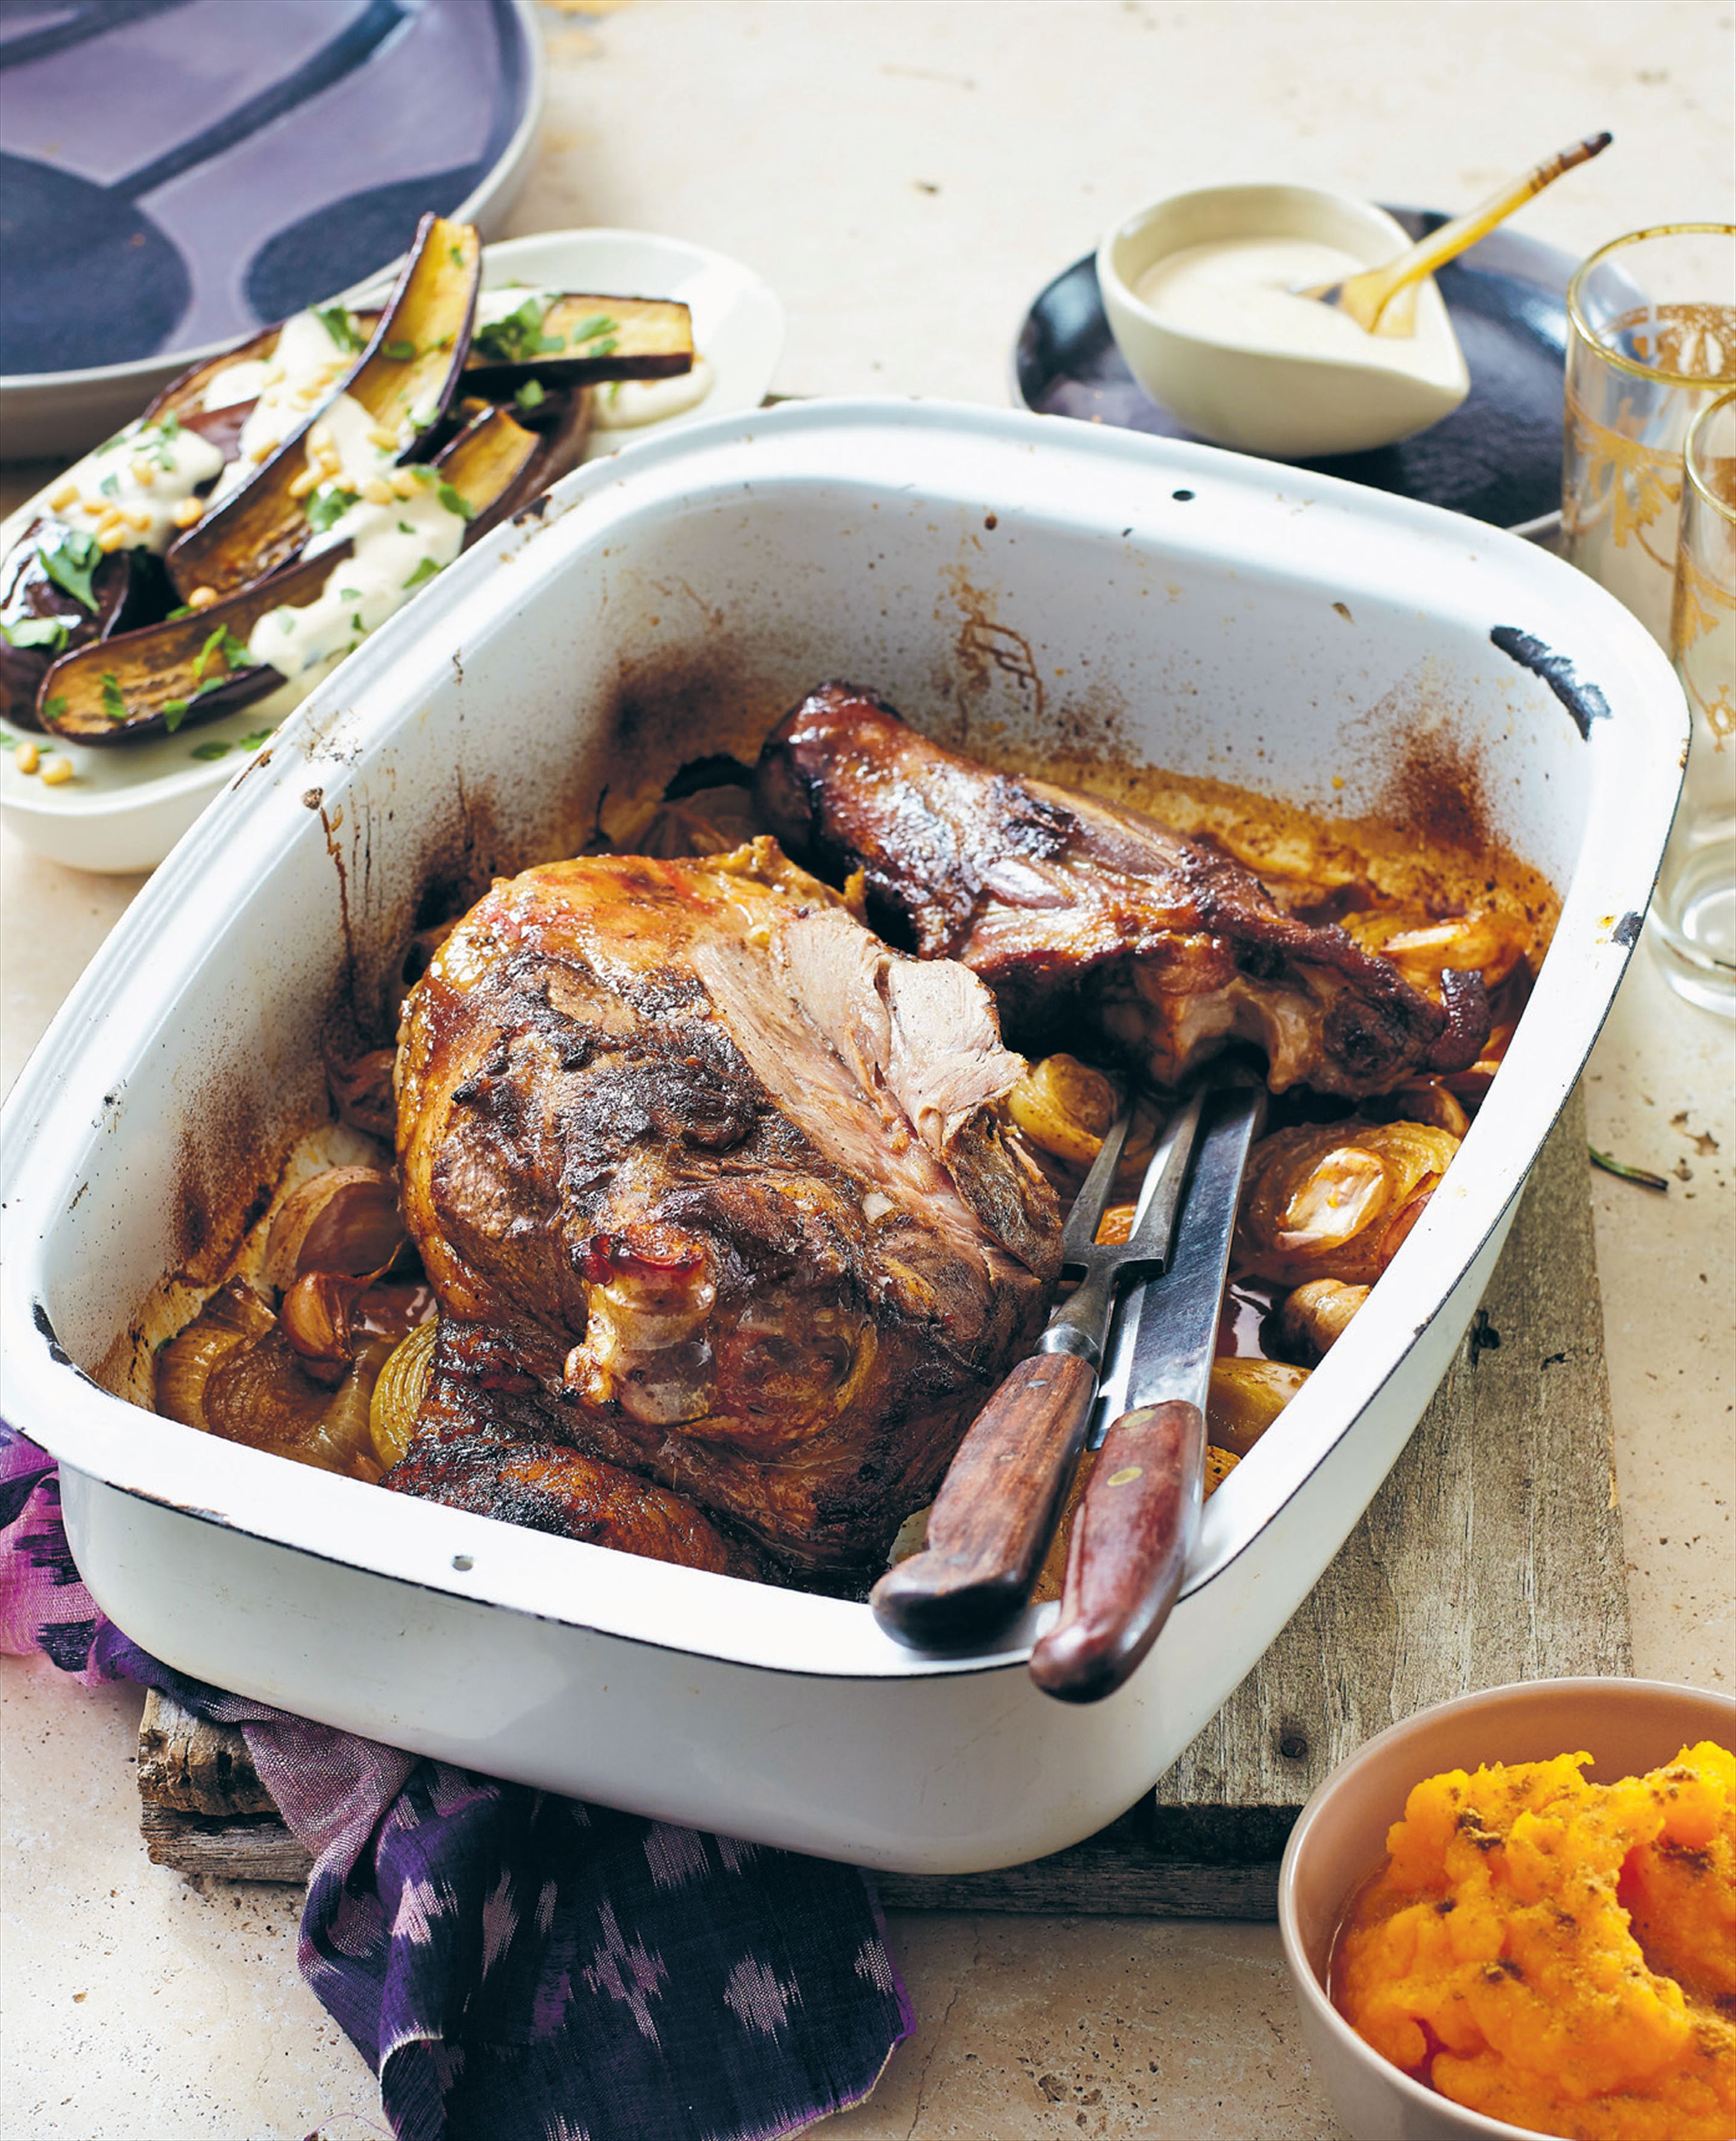 Lamb shoulder with Middle Eastern spices